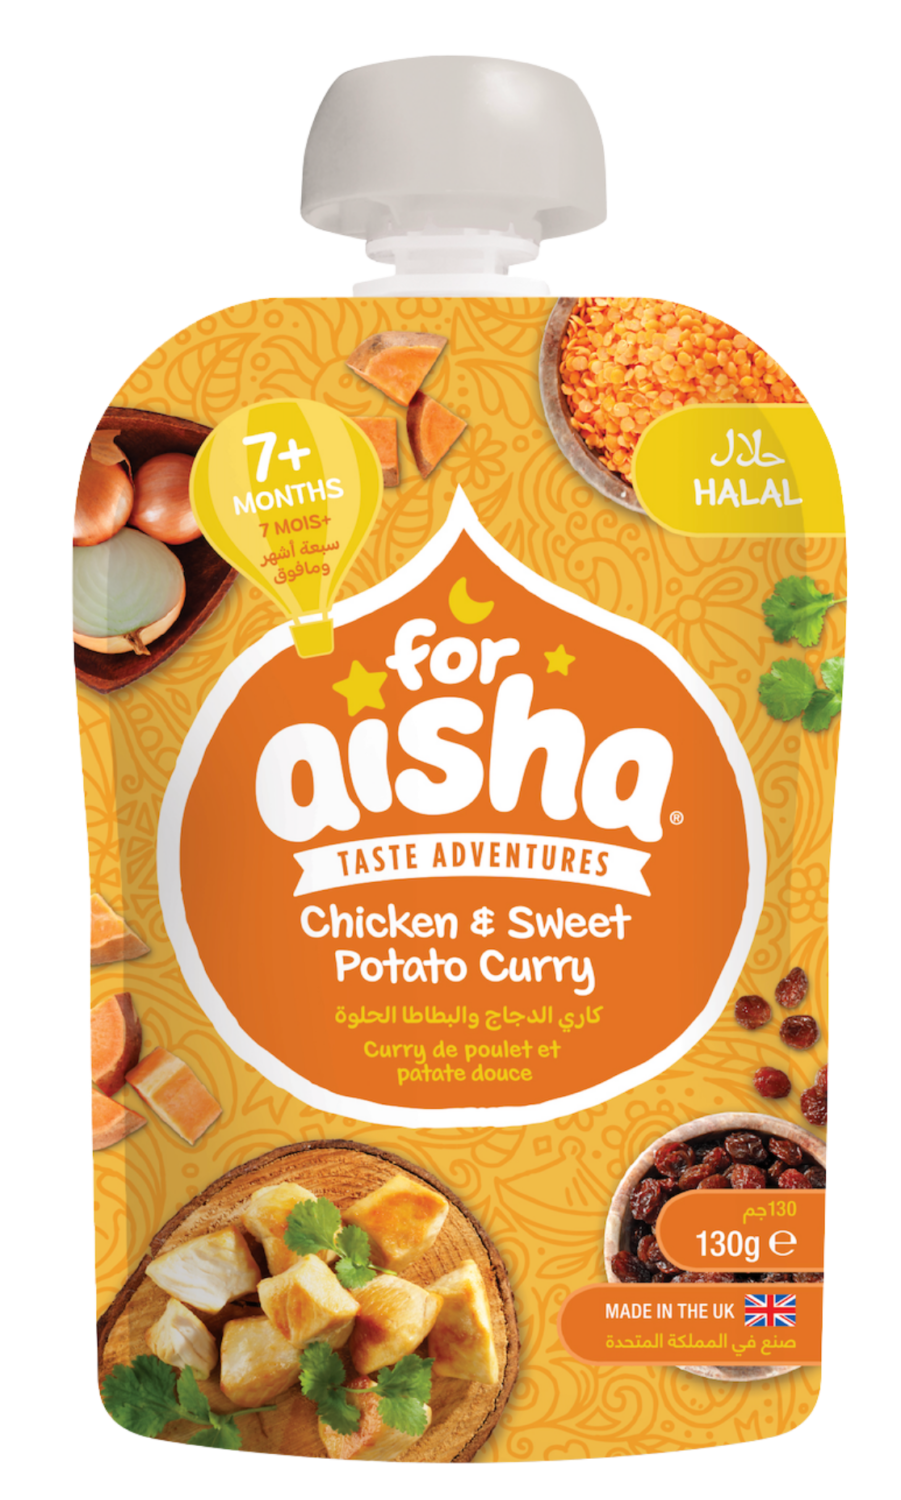 chicken and sweet potato curry pouch for babies aged 7 months and older